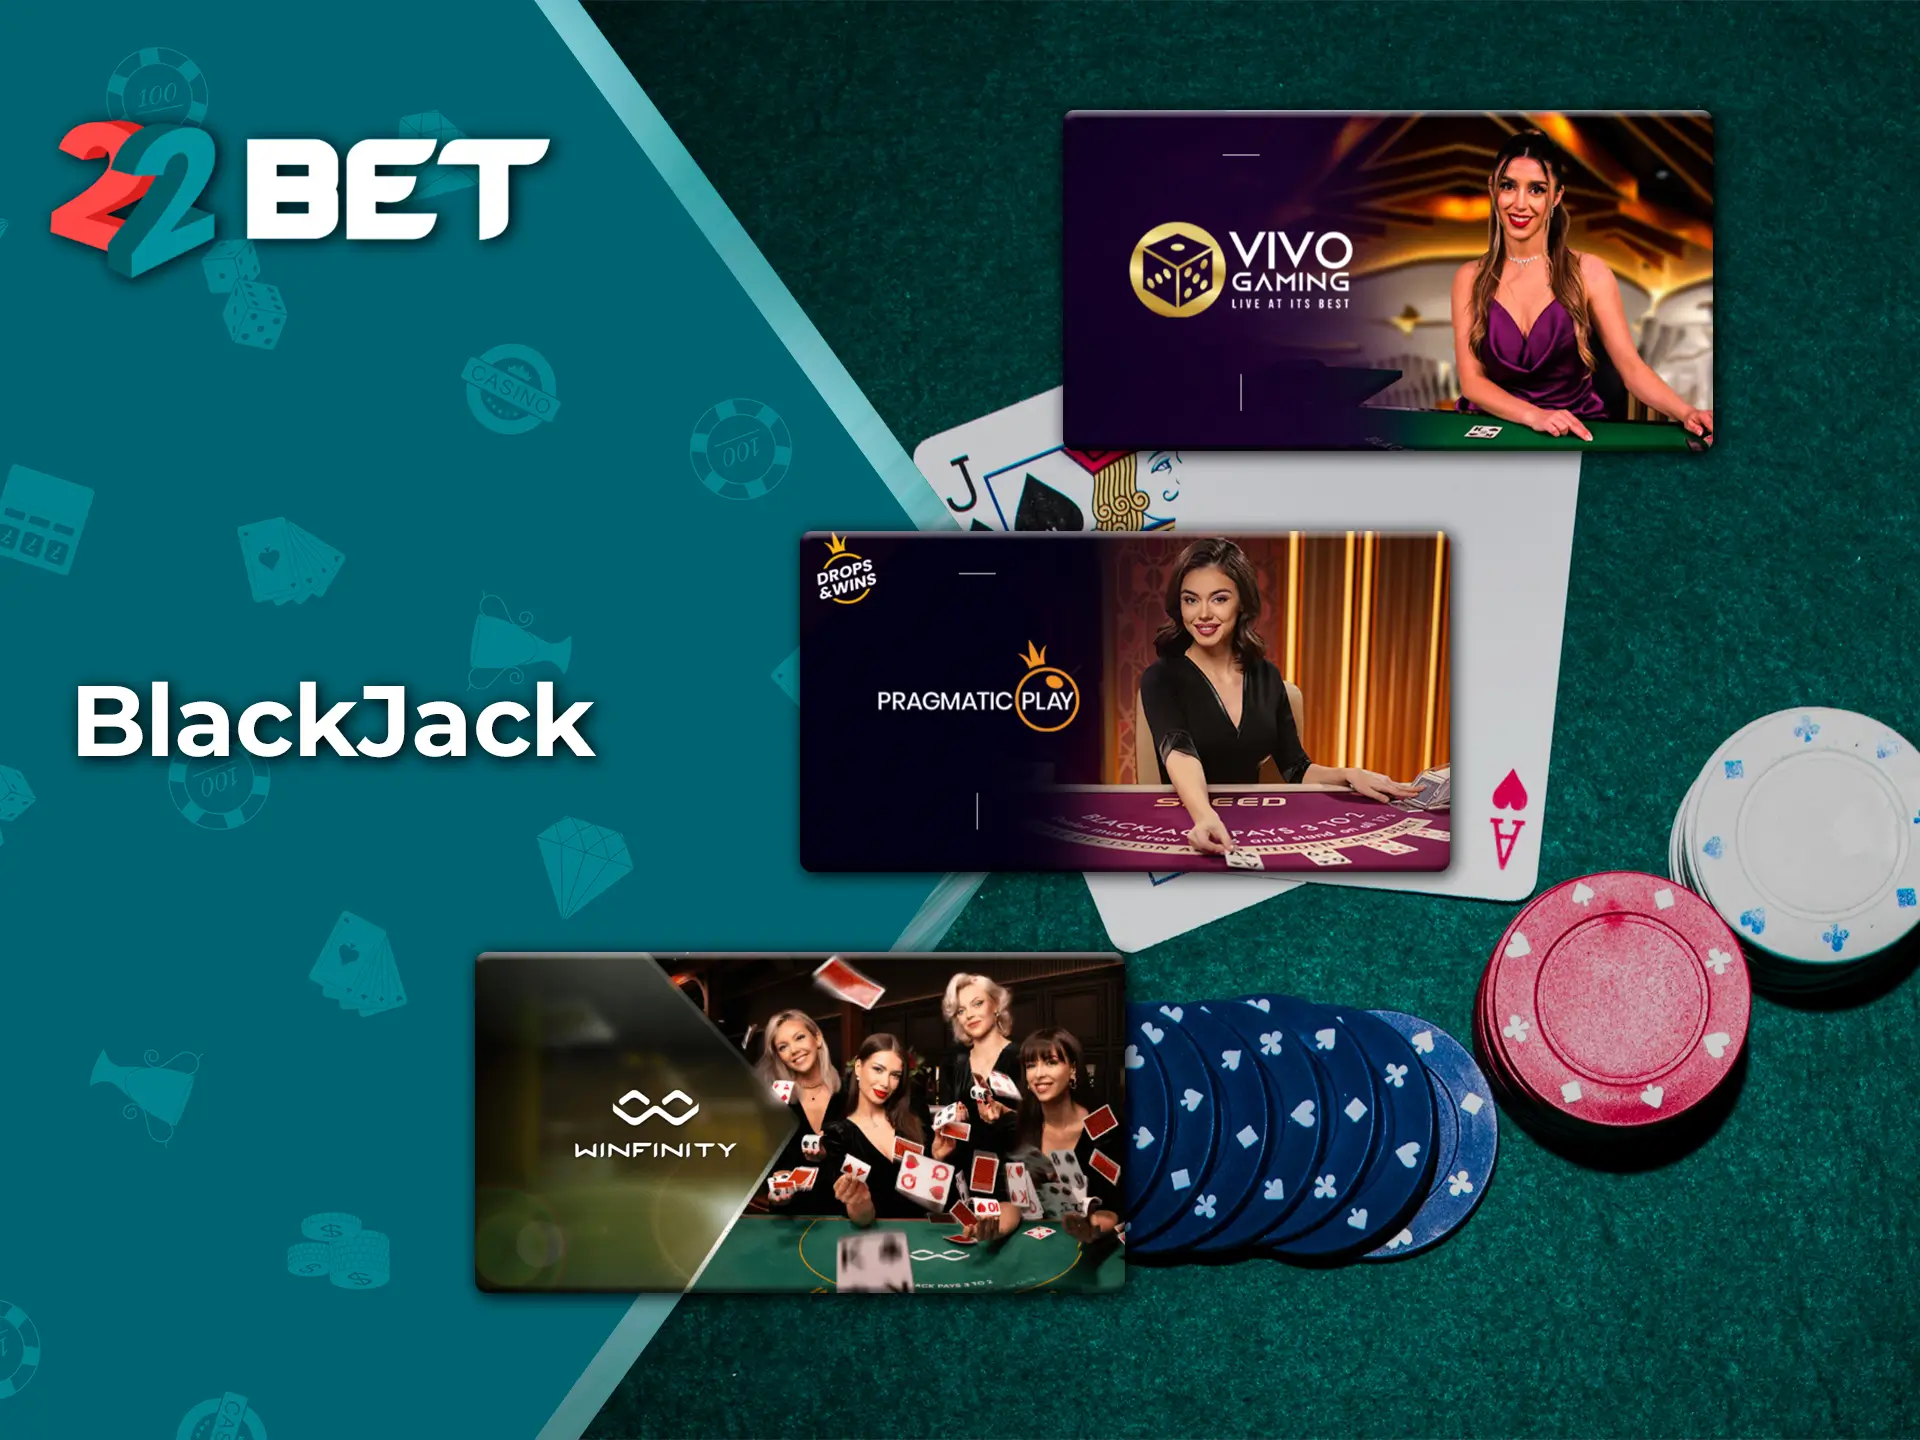 Compete with dealers when playing BlackJack from 22Bet.